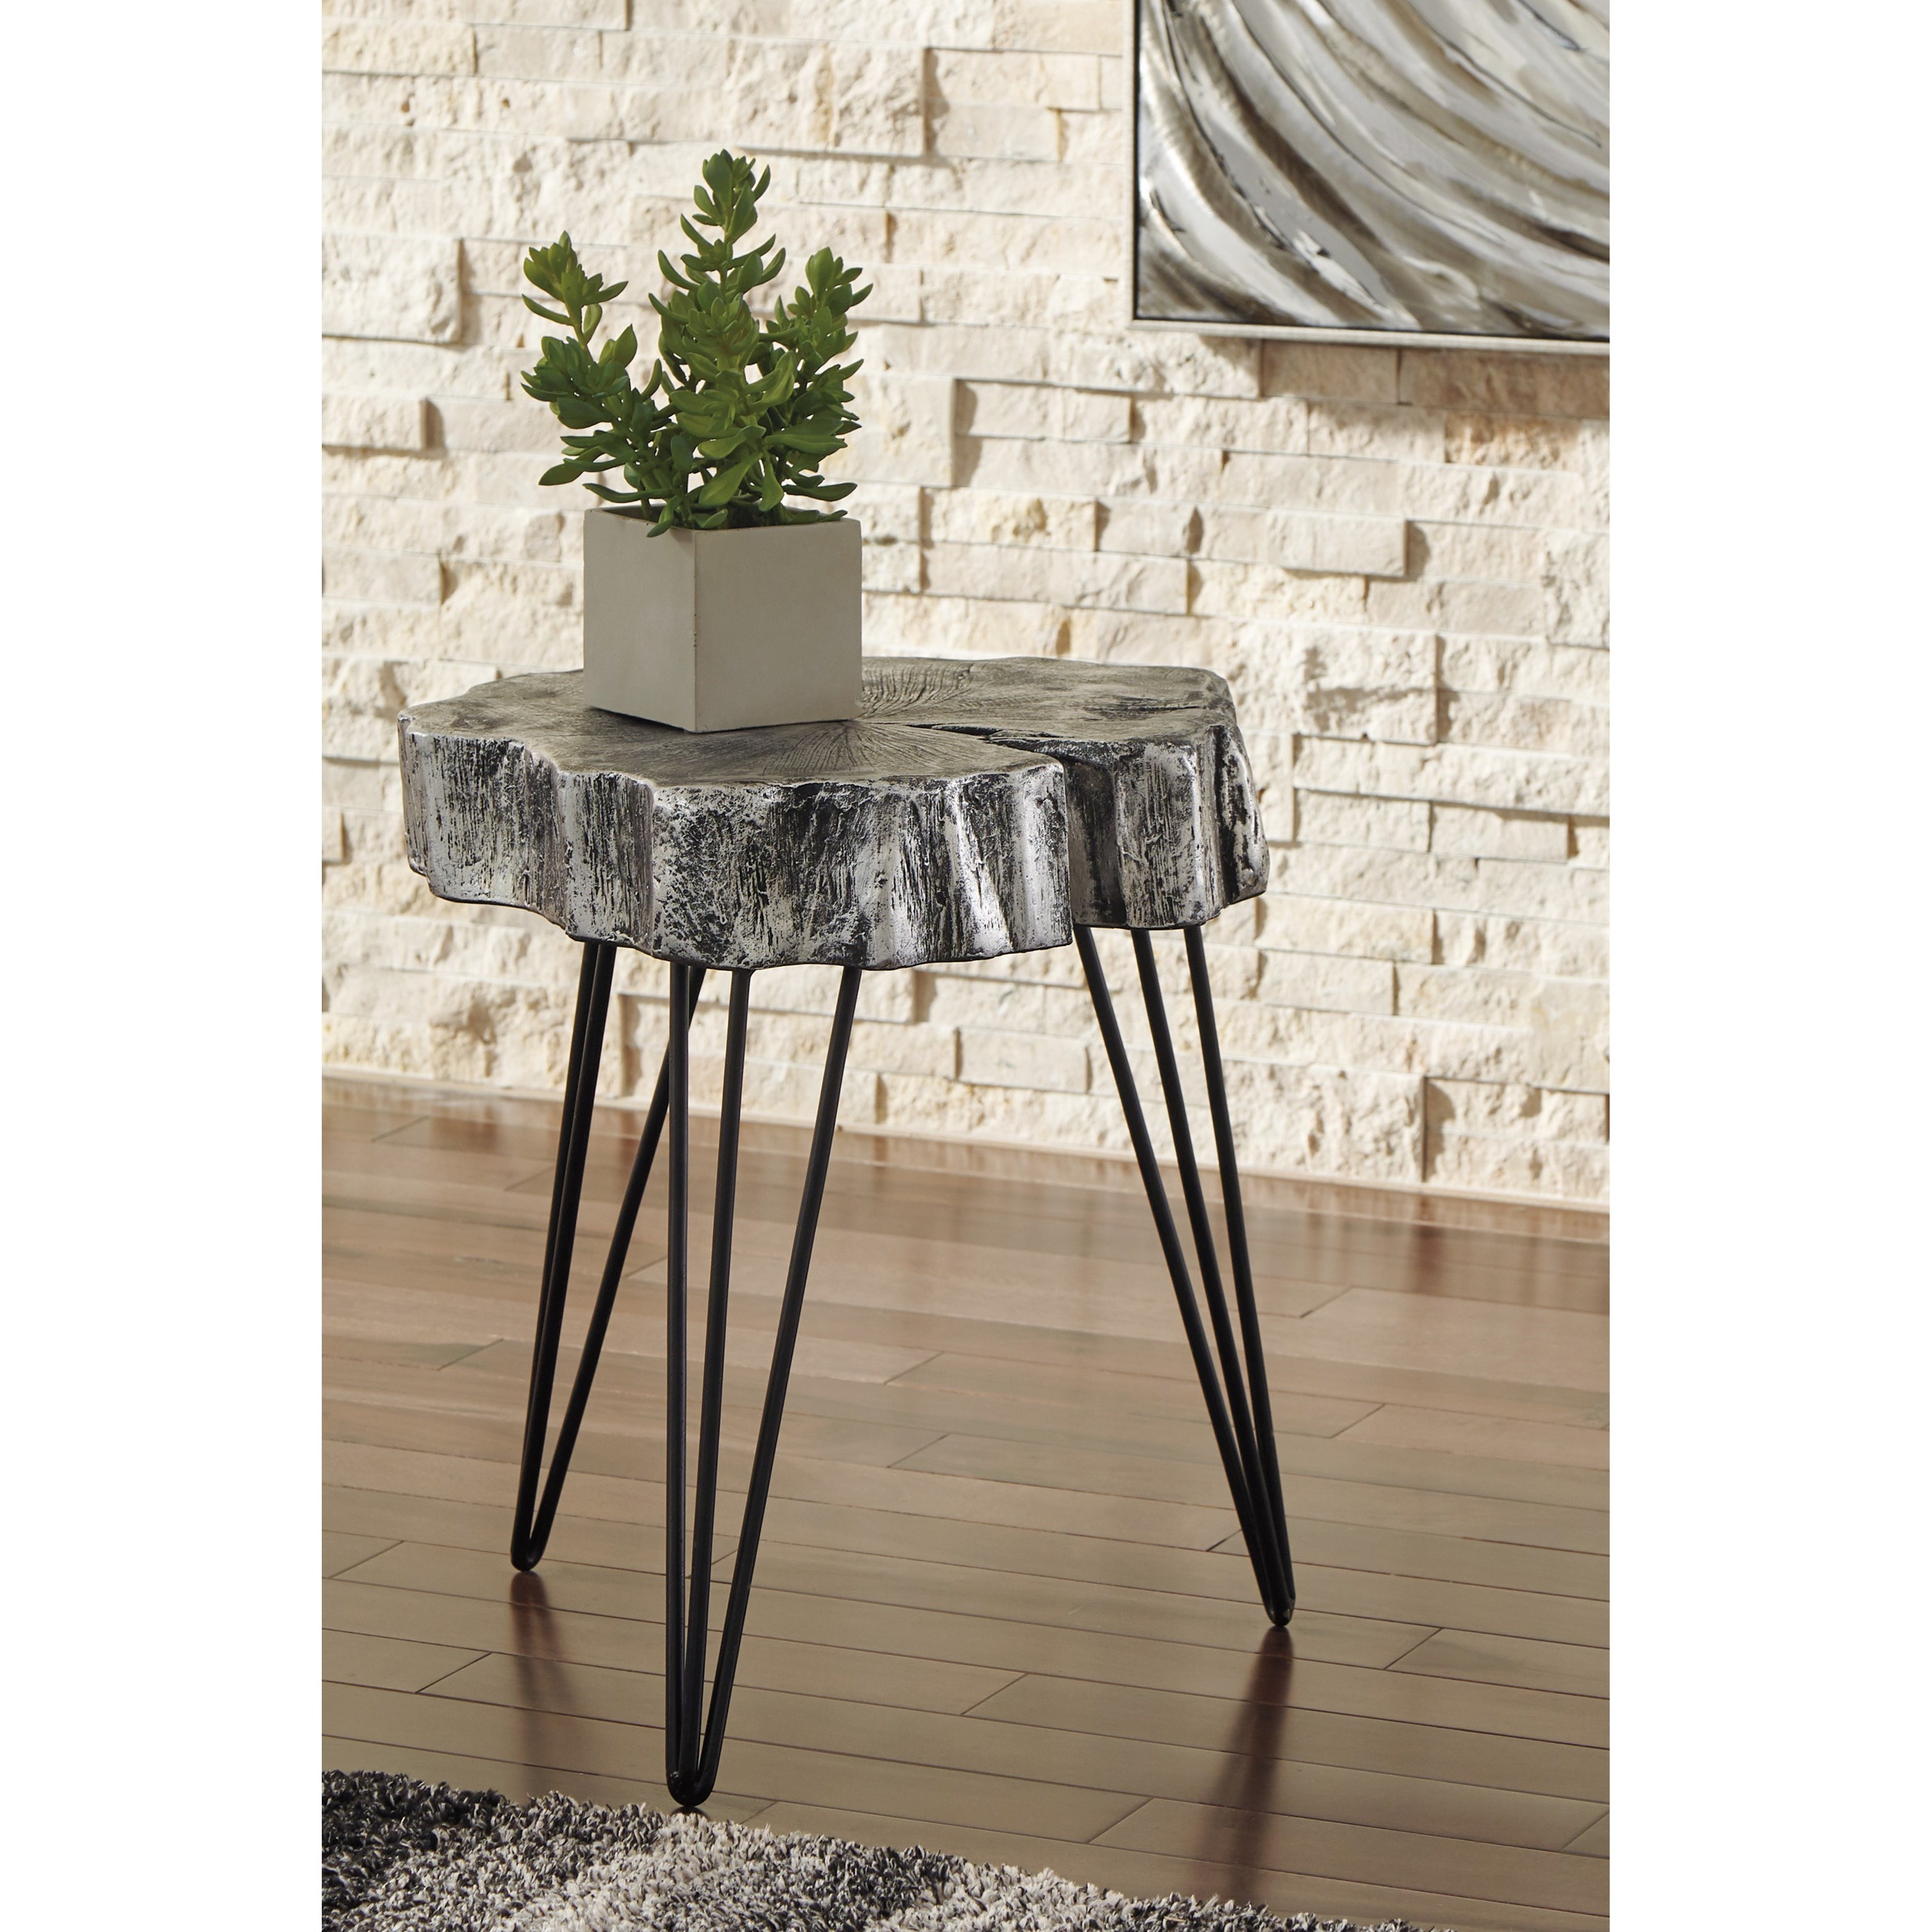 antique silver finish wood stump style accent table with hairpin products signature design ashley color dellman legs battery operated bedside lights foot trestle light lamp glass